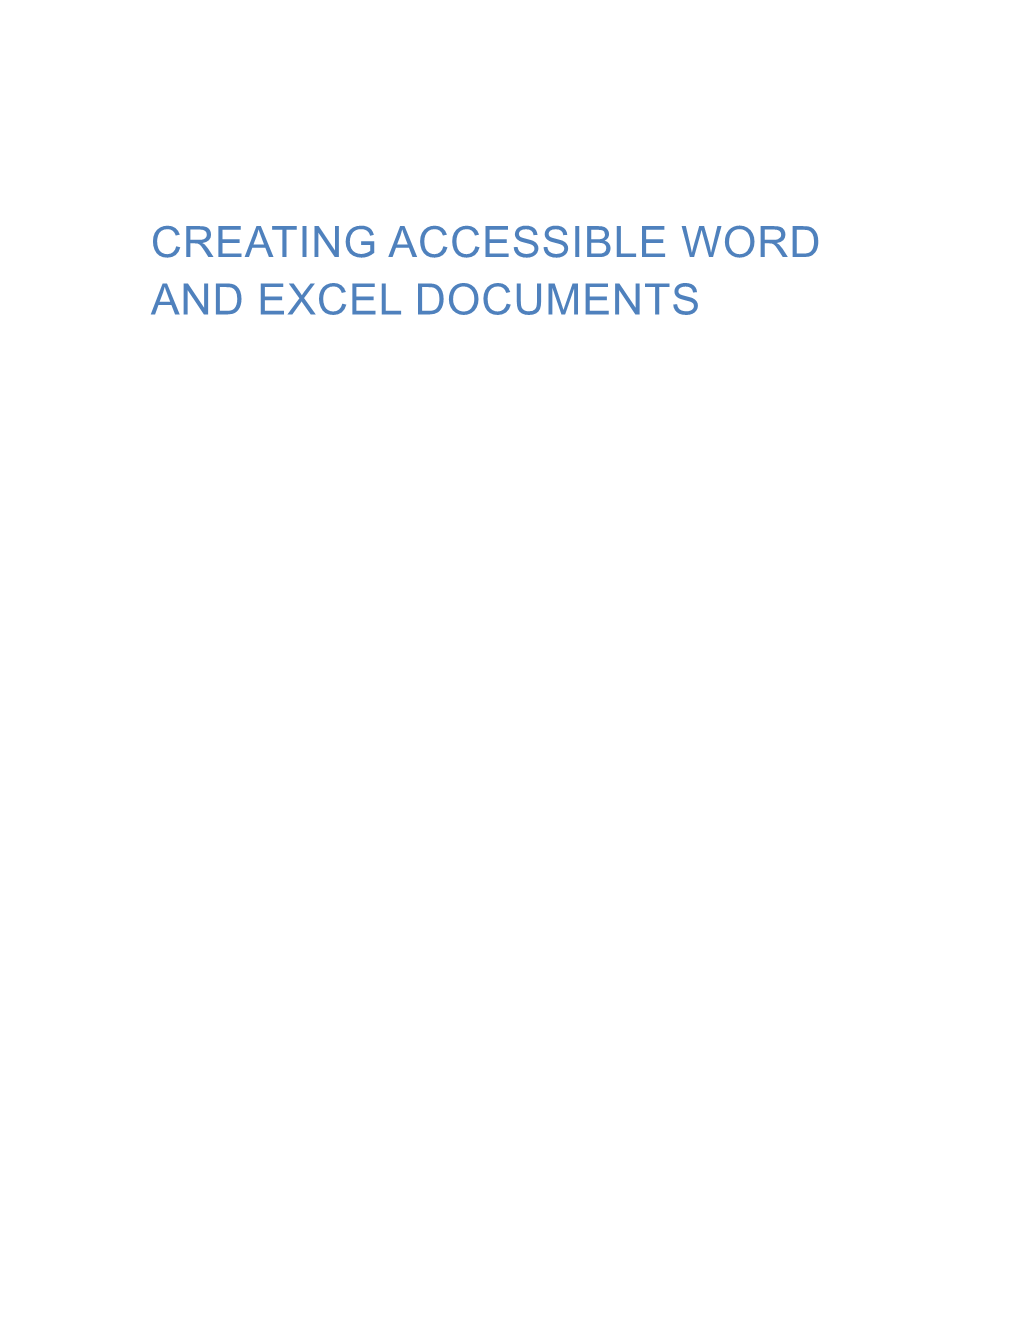 Creating Accessible Word and Excel Documents